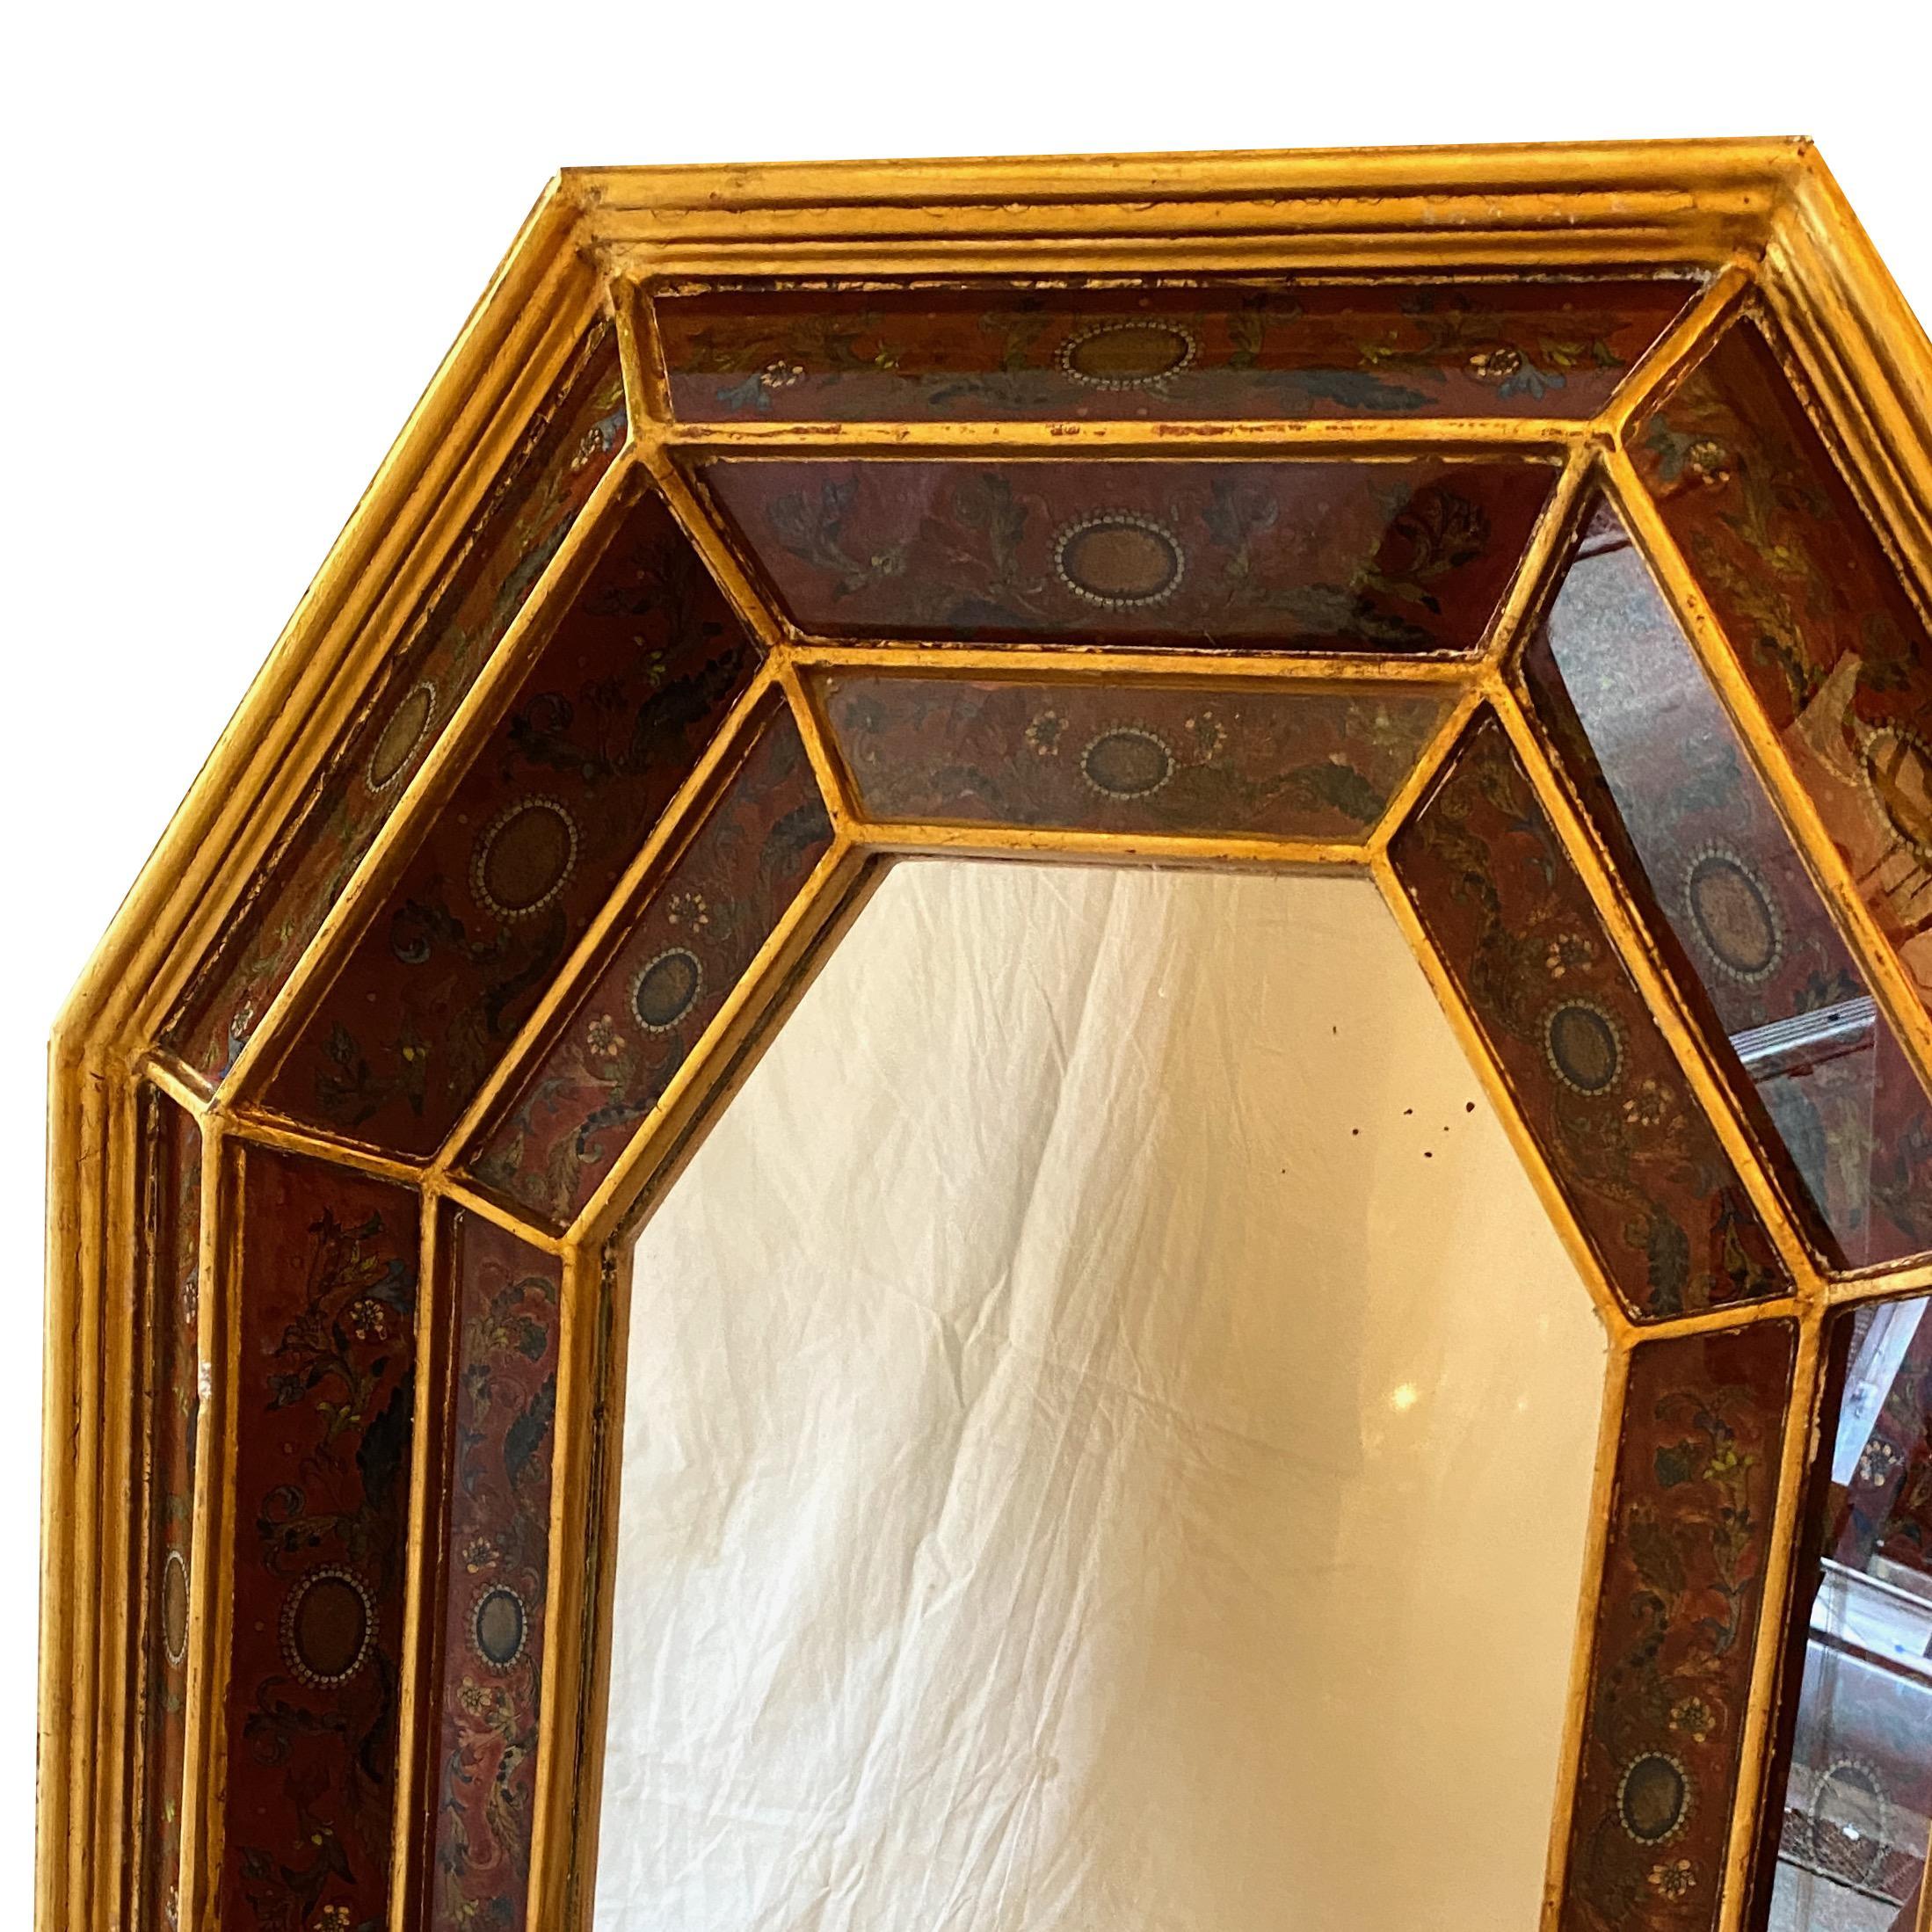 A large circa 1940’s Italian reverse-painted glass mirror with gilt frame.

Measurements:
Height: 45?
Width: 35?
Depth: 4?